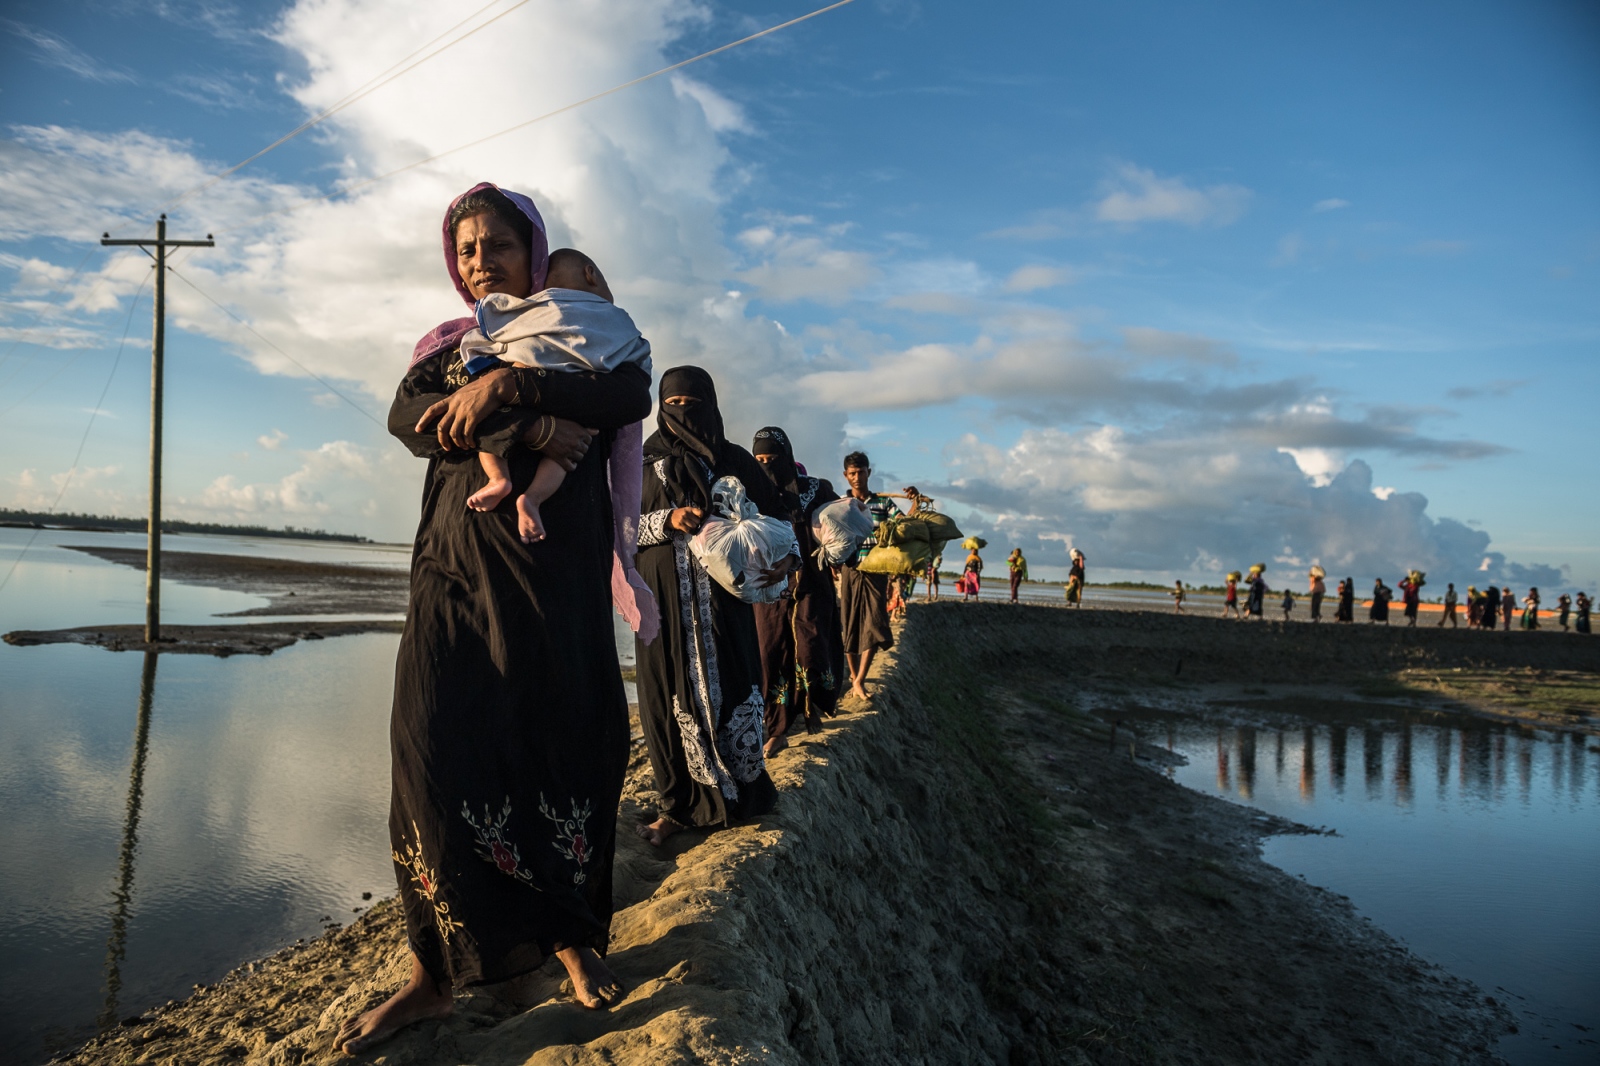 Rohingya, Non-existing Existence